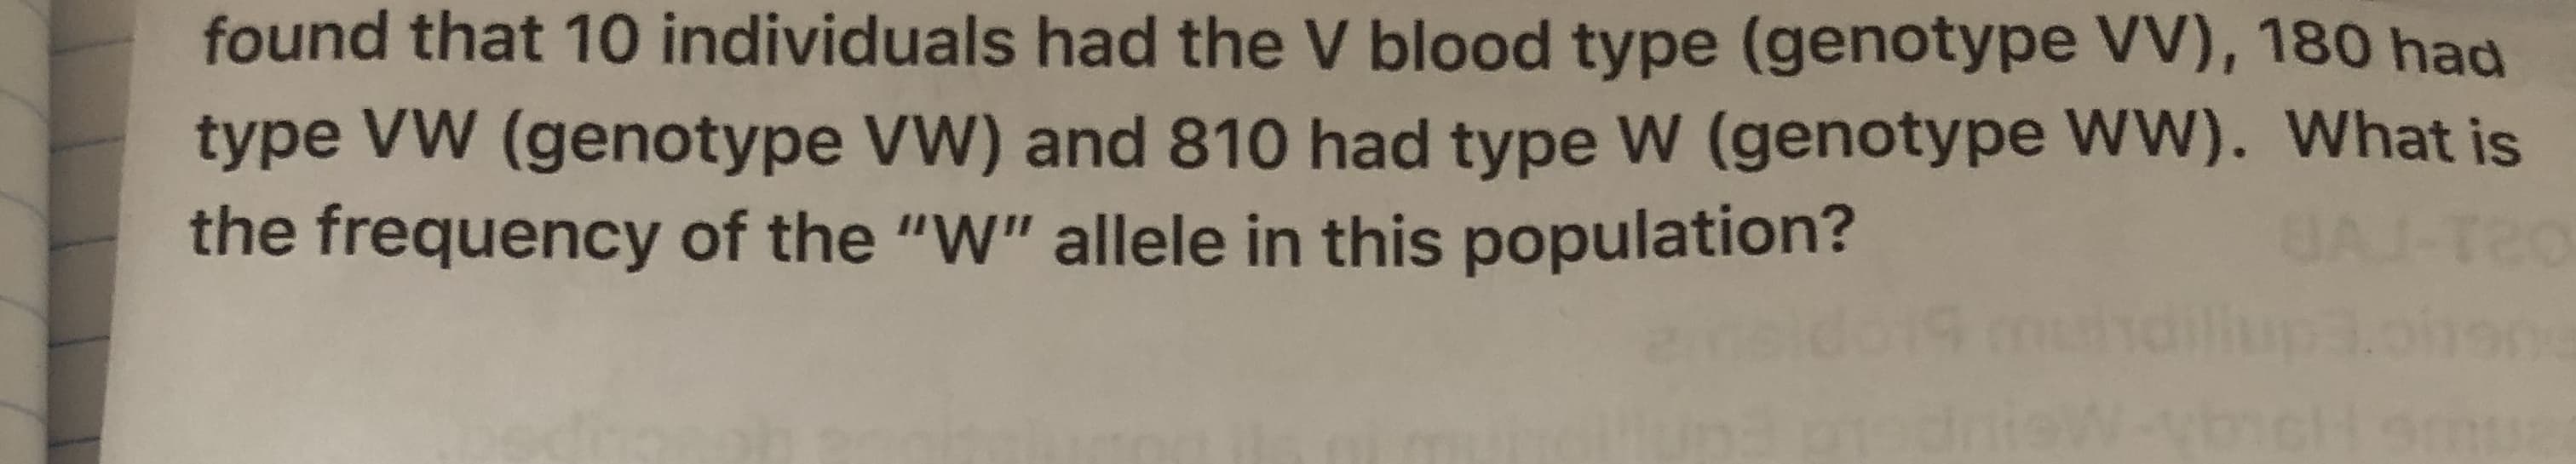 found that 10 individuals had the V blood type (genotype VV), 180 had
type VW (genotype VW) and 810 had type W (genotype WW). What is
the frequency of the "W" allele in this population?
JAJ-T2
